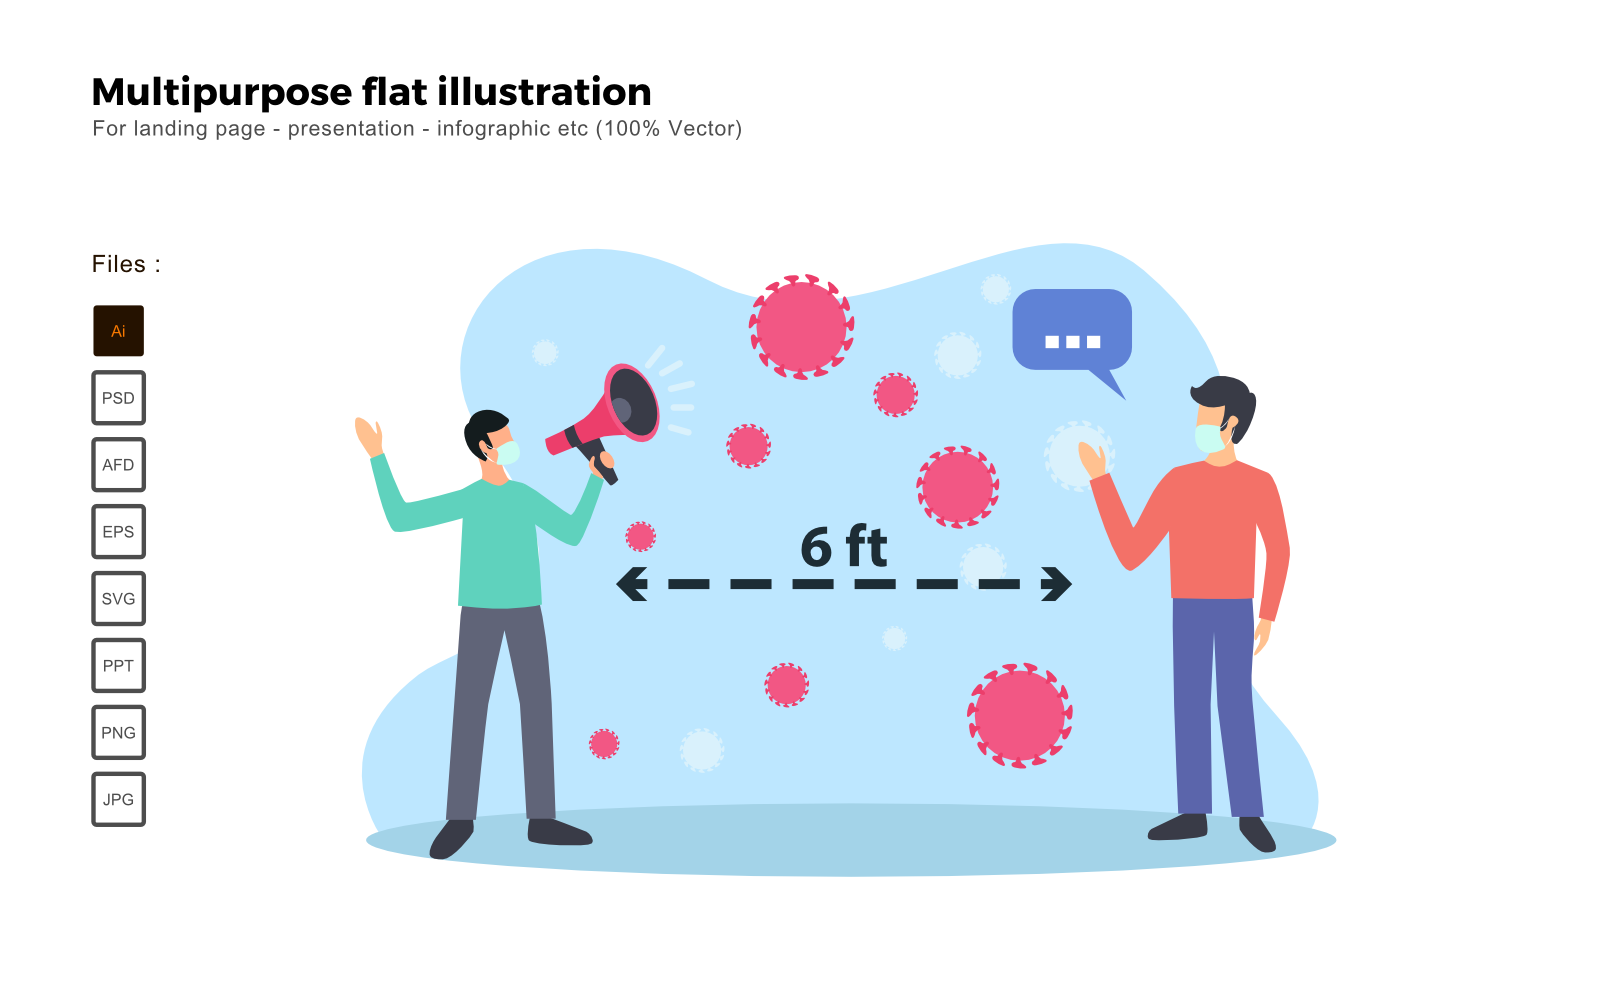 Multipurpose Flat Illustration Physical Distancing - Vector Image